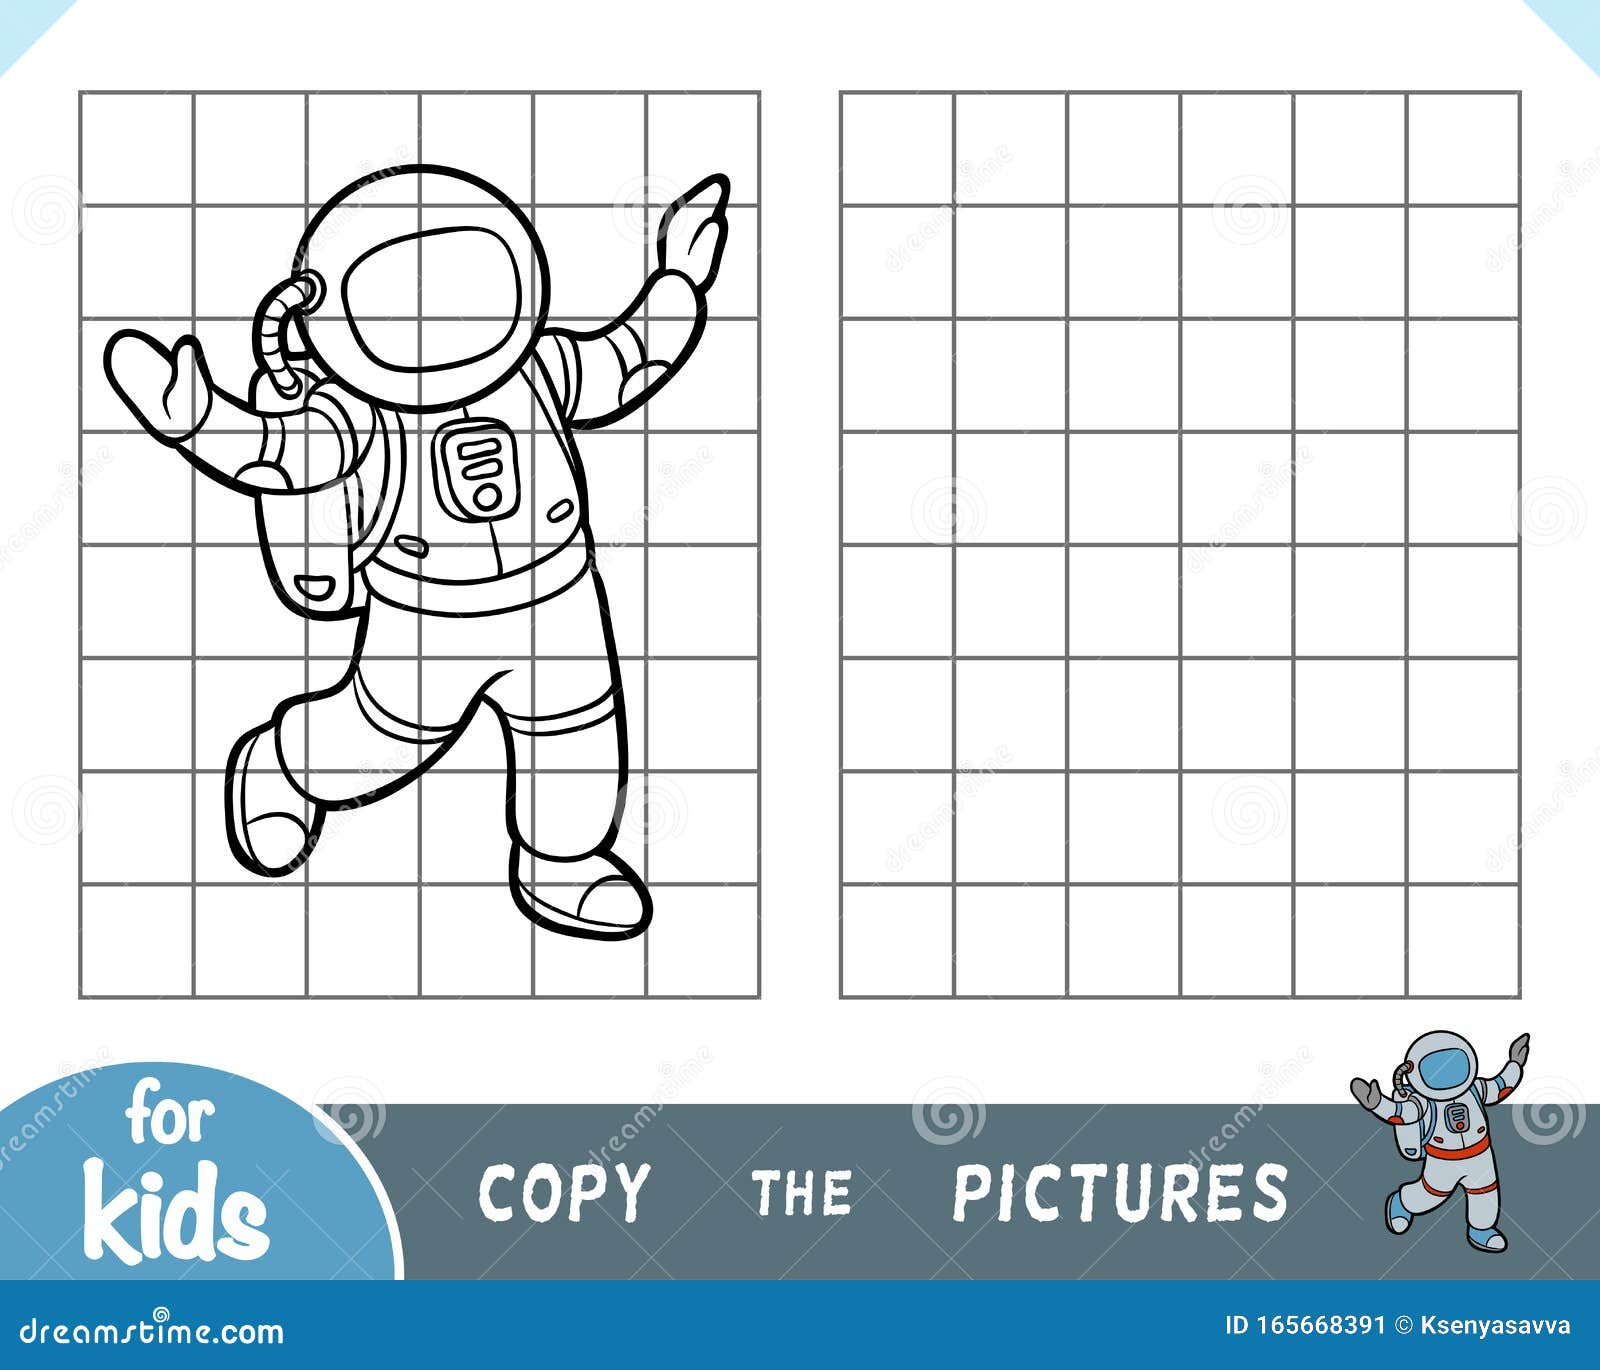 copy the picture, game for children, astronaut